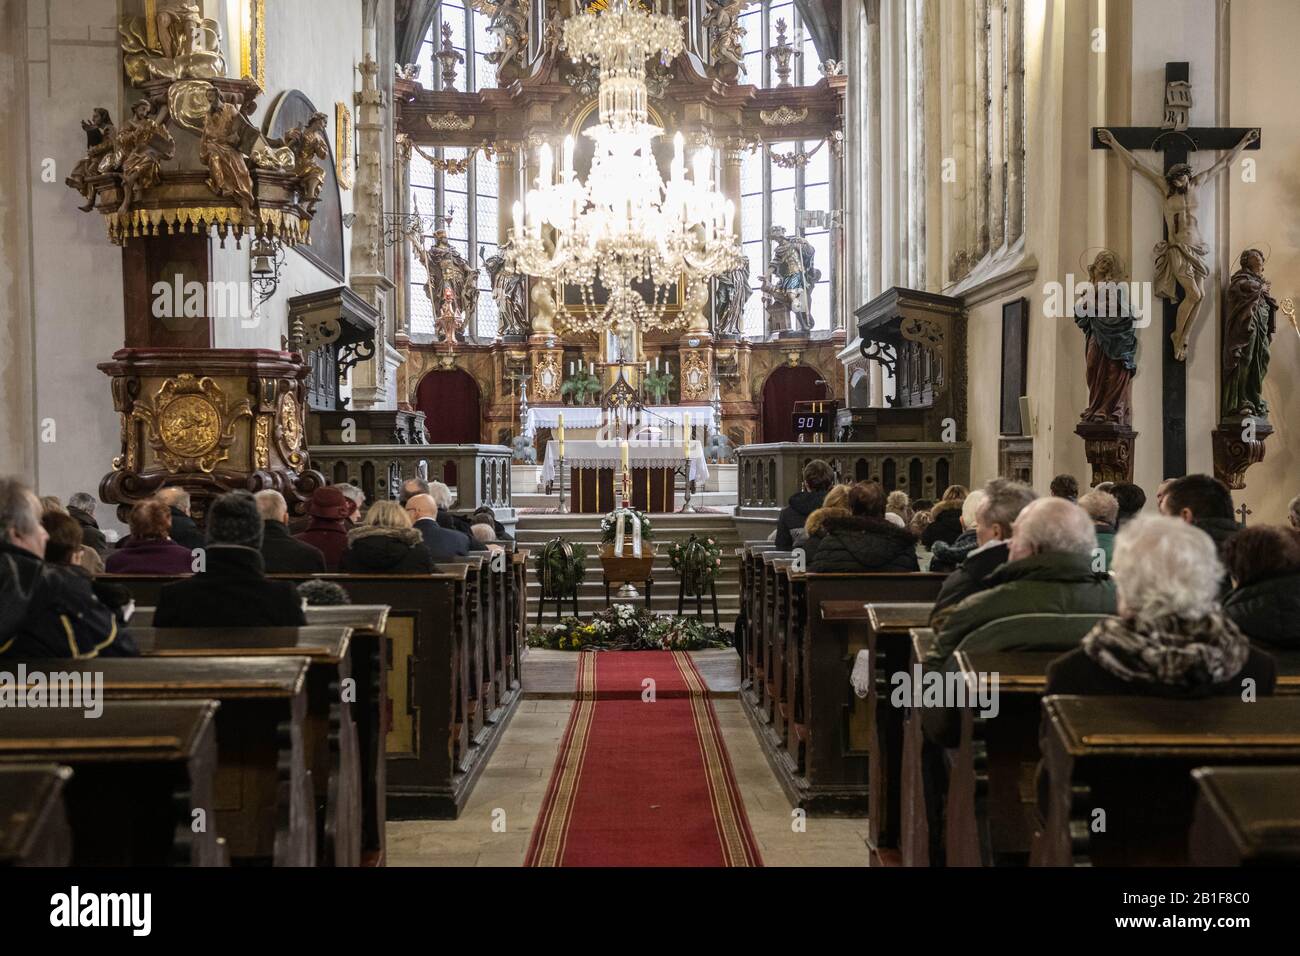 Melnik, Czech Republic. 25th Feb, 2020. Last farewell to Vladimir Hradec, who cooperated with the anti-communist resistence group of Masin brothers in the 1950s, was held on February 25, 2020, in Melnik, Czech Republic. Hradec died at the age of 88 years. Credit: Vit Cerny/CTK Photo/Alamy Live News Stock Photo